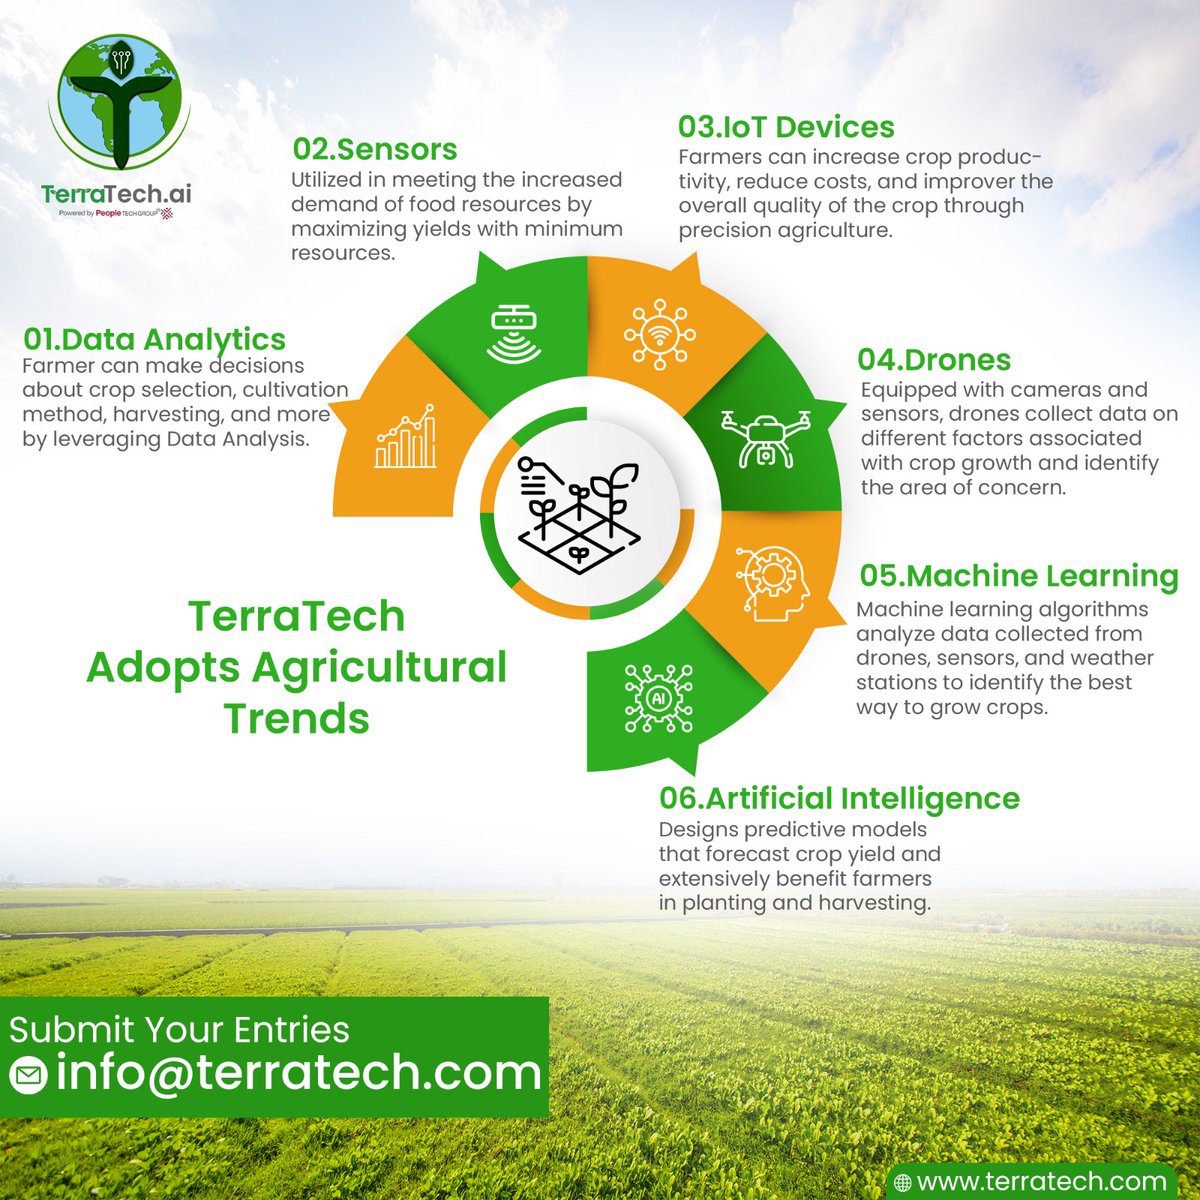 TerraTech, the latest agricultural innovation, believes in smart farming practices to improve precision, work efficiency, maximize yields, and reduce waste of resources. 

#TerraTech #AgricultureSustainability #AgTech #AgricultureTrends